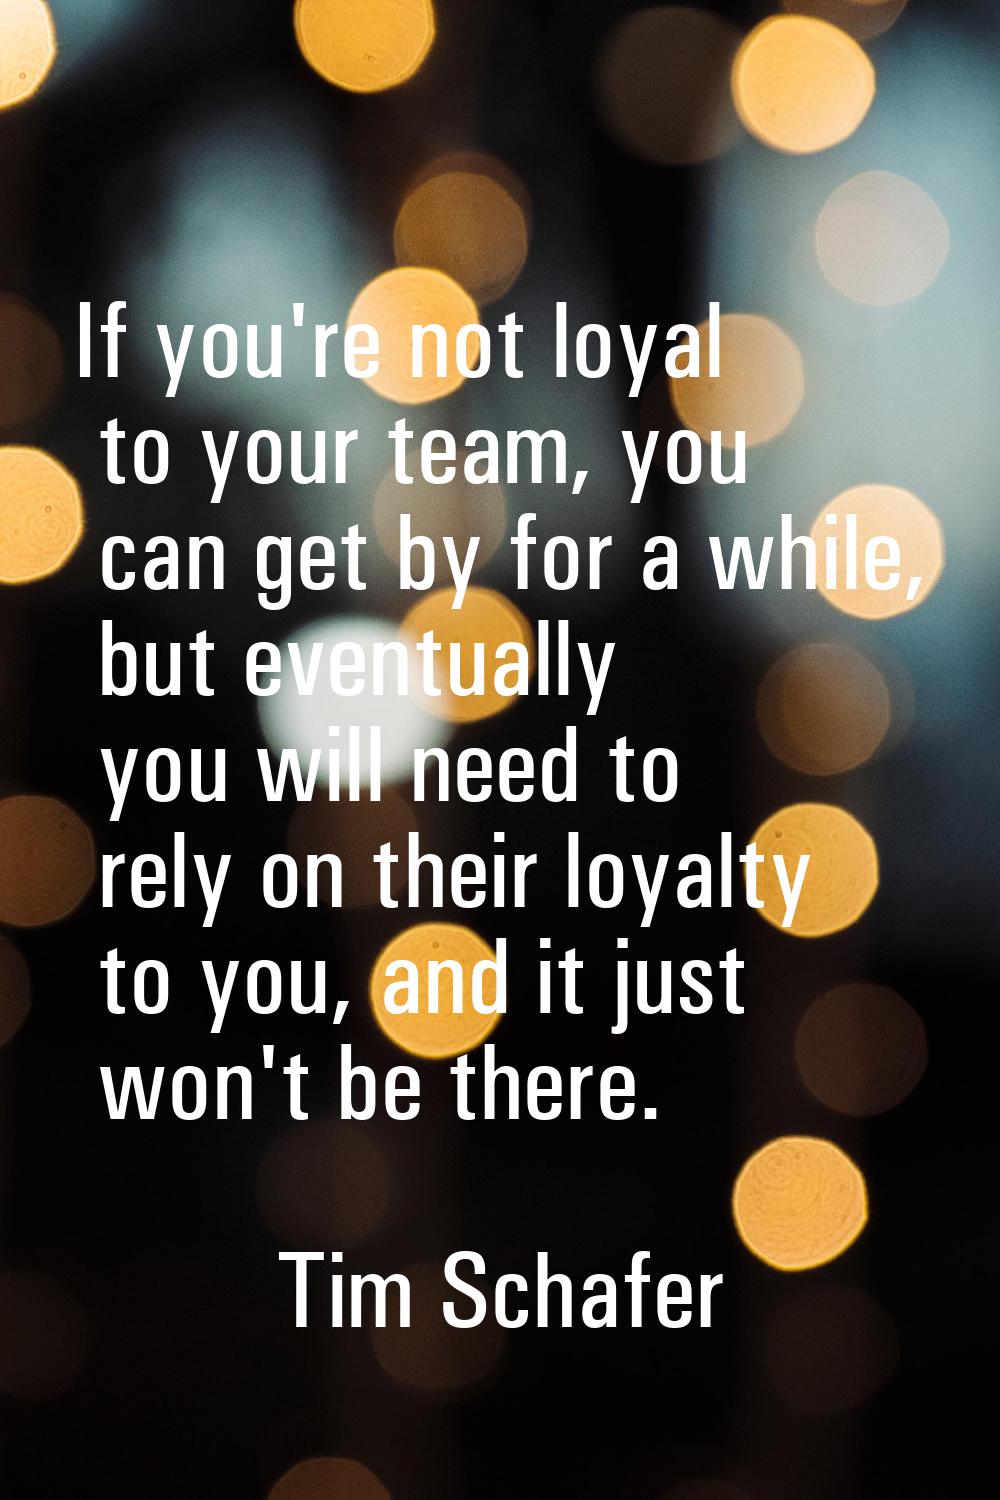 If you're not loyal to your team, you can get by for a while, but eventually you will need to rely 